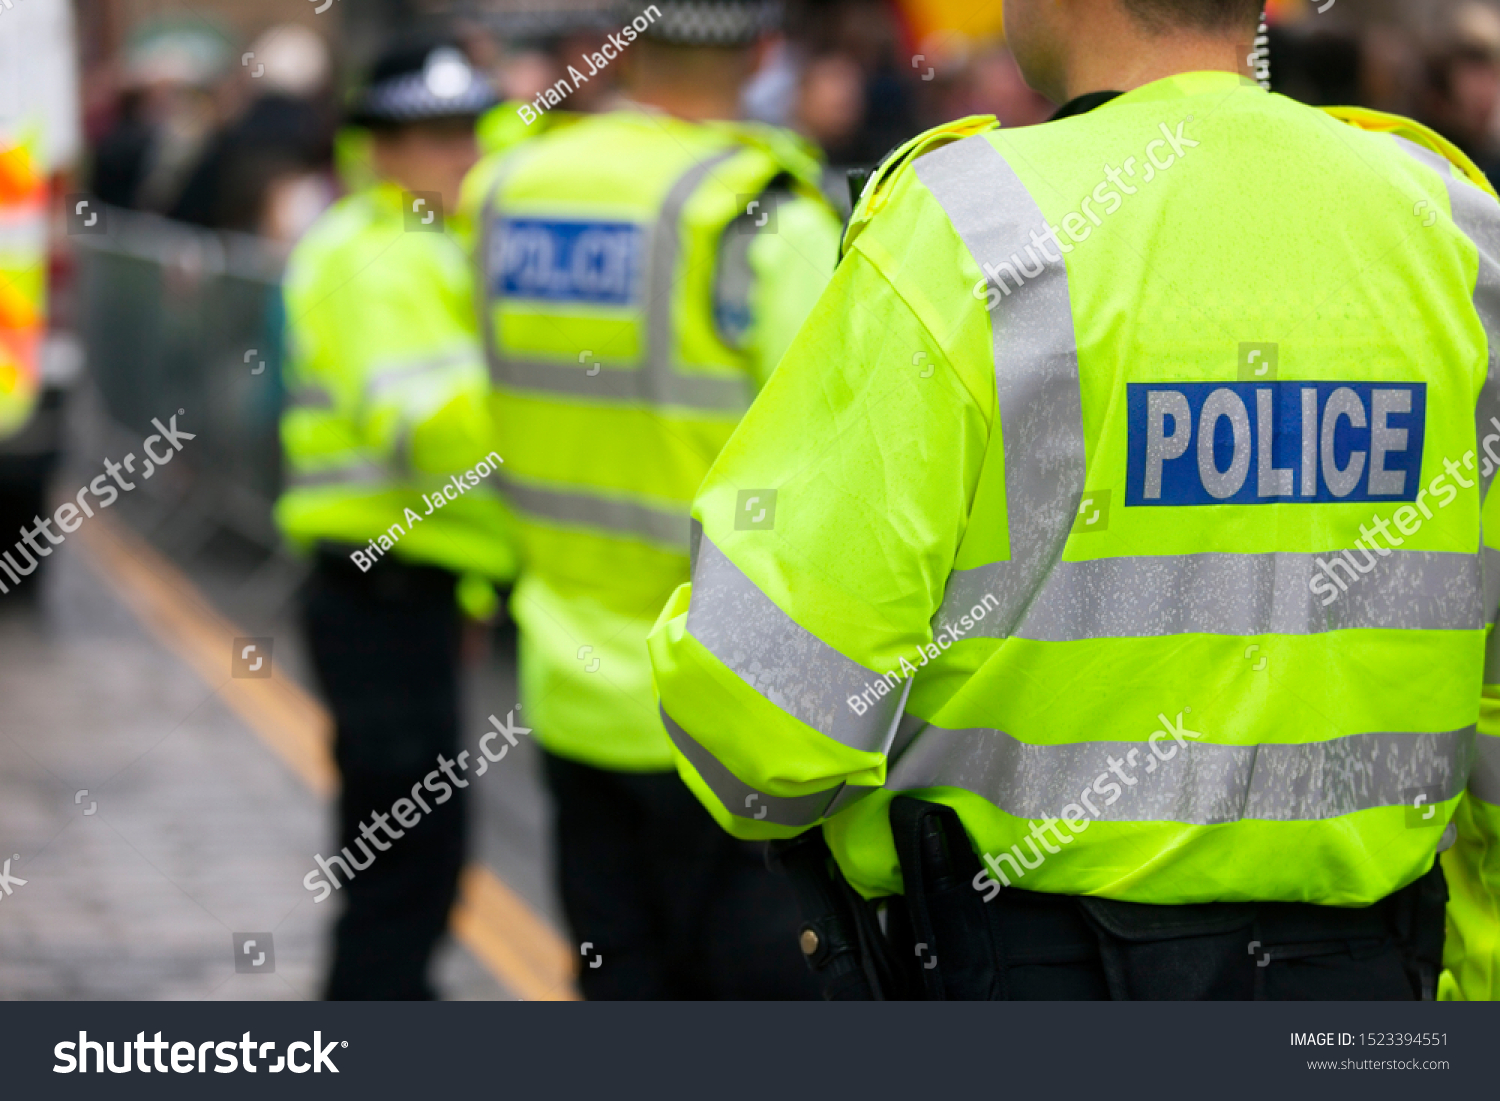 Police in hi-visibility jackets policing crowd control at a UK event #1523394551